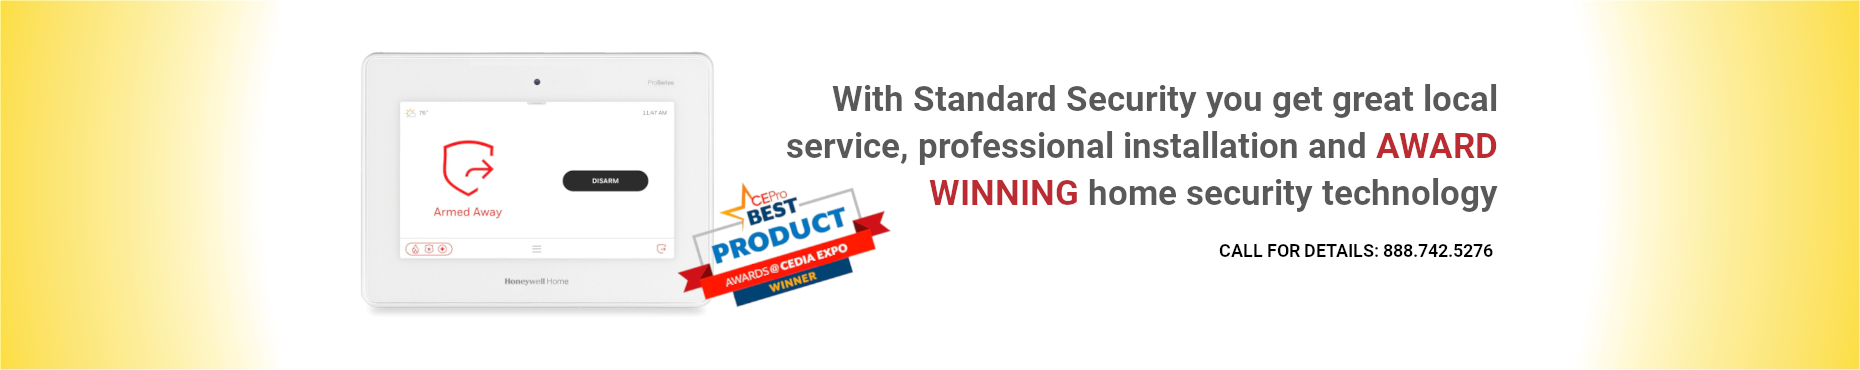 Choose Standard Security Systems for great local service.